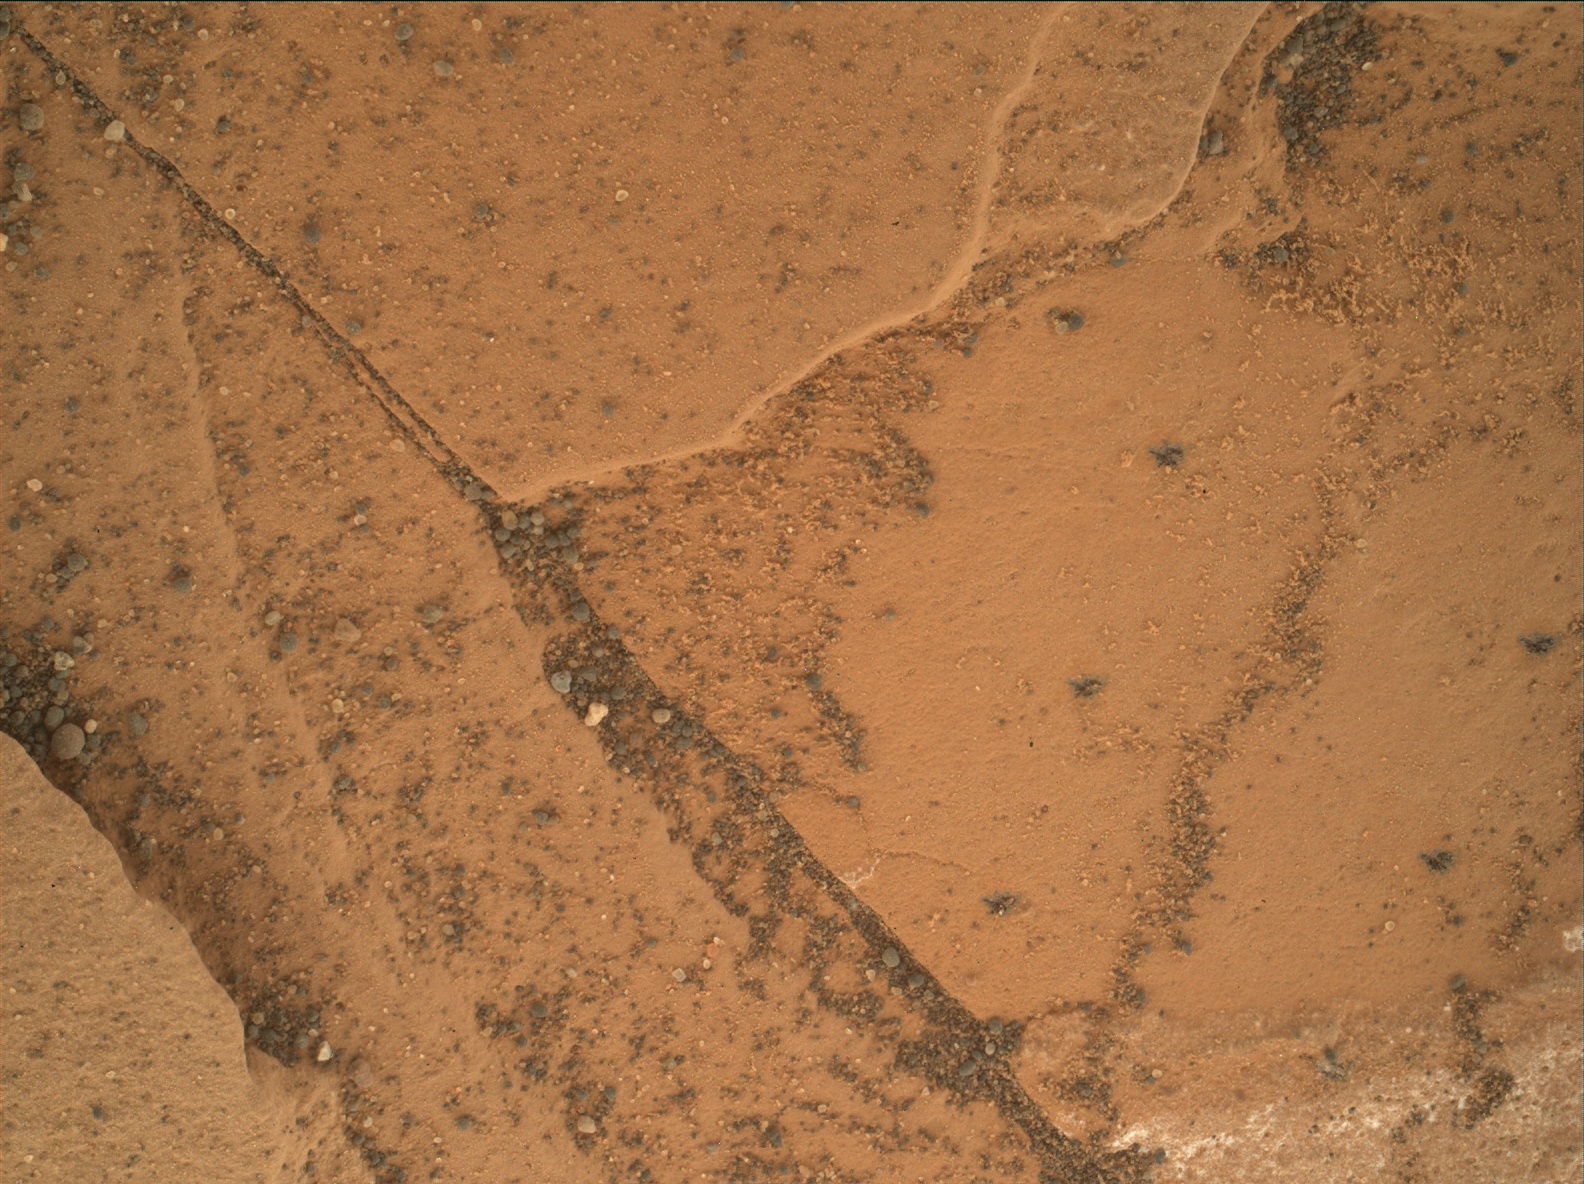 Nasa's Mars rover Curiosity acquired this image using its Mars Hand Lens Imager (MAHLI) on Sol 1781